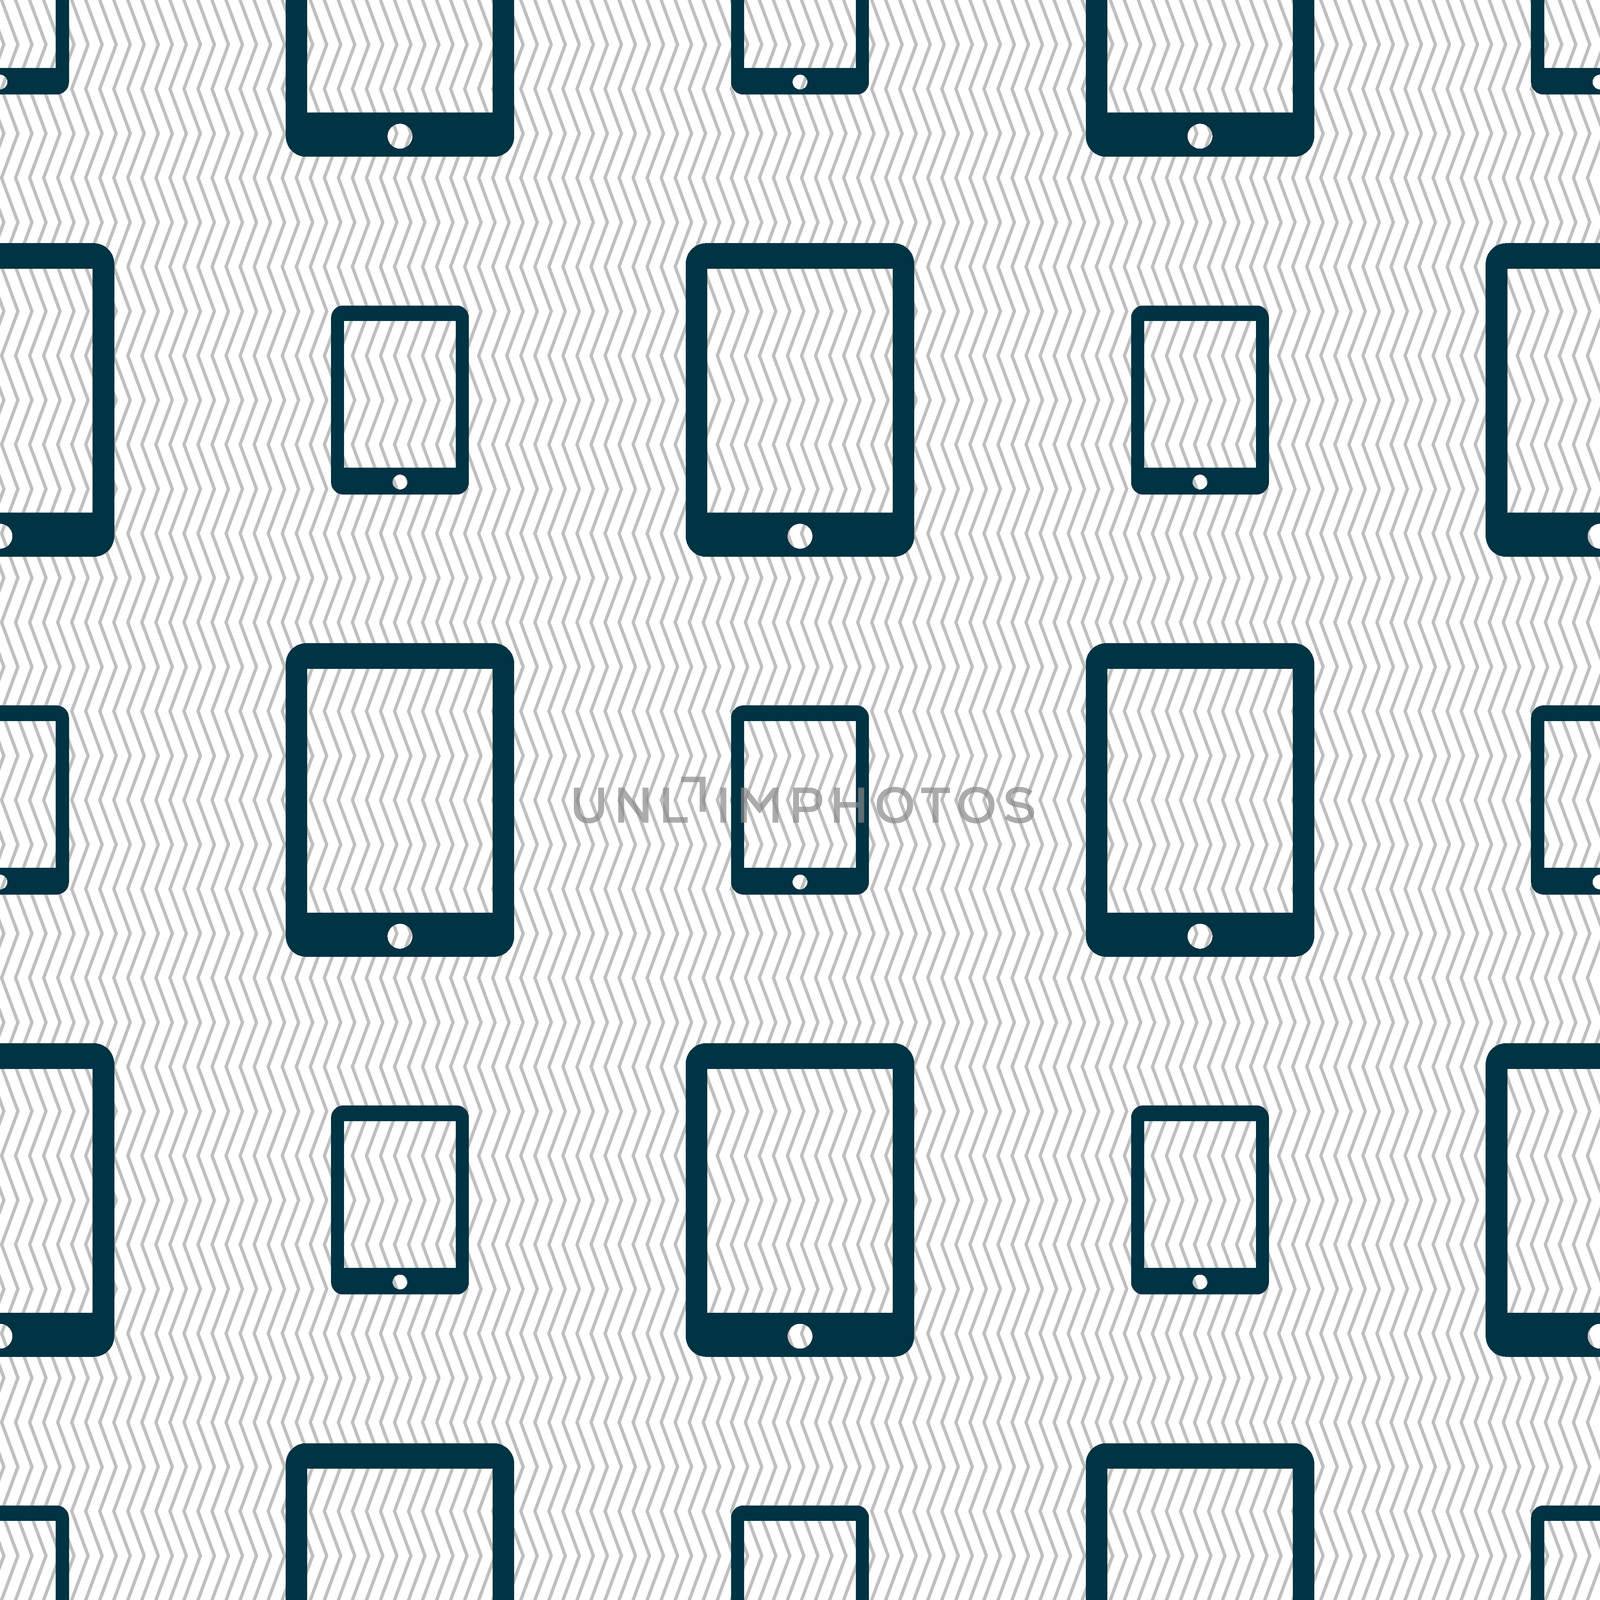 Smartphone sign icon. Support symbol. Call center. Seamless abstract background with geometric shapes. illustration